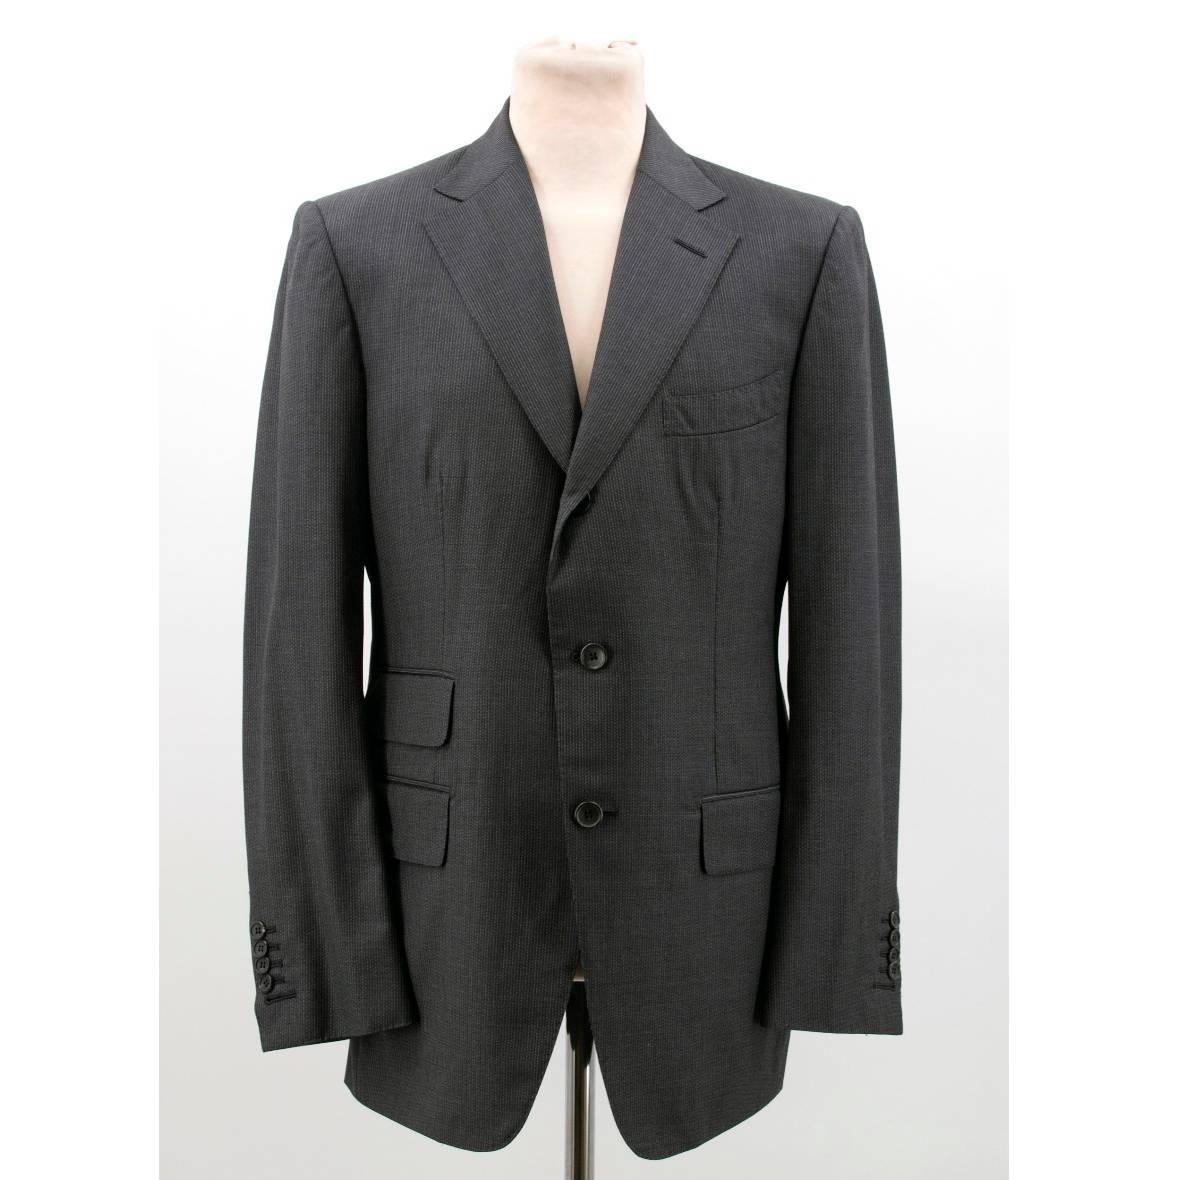 Tom Ford grey stripe suit in a tailored, single-breasted self stripe style. The jacket features 3 front flap pockets and a chest pocket. The slim-fit trousers featured turn-ups and buckle detail at the waistband.

Size: XL
Measurements: Approx.